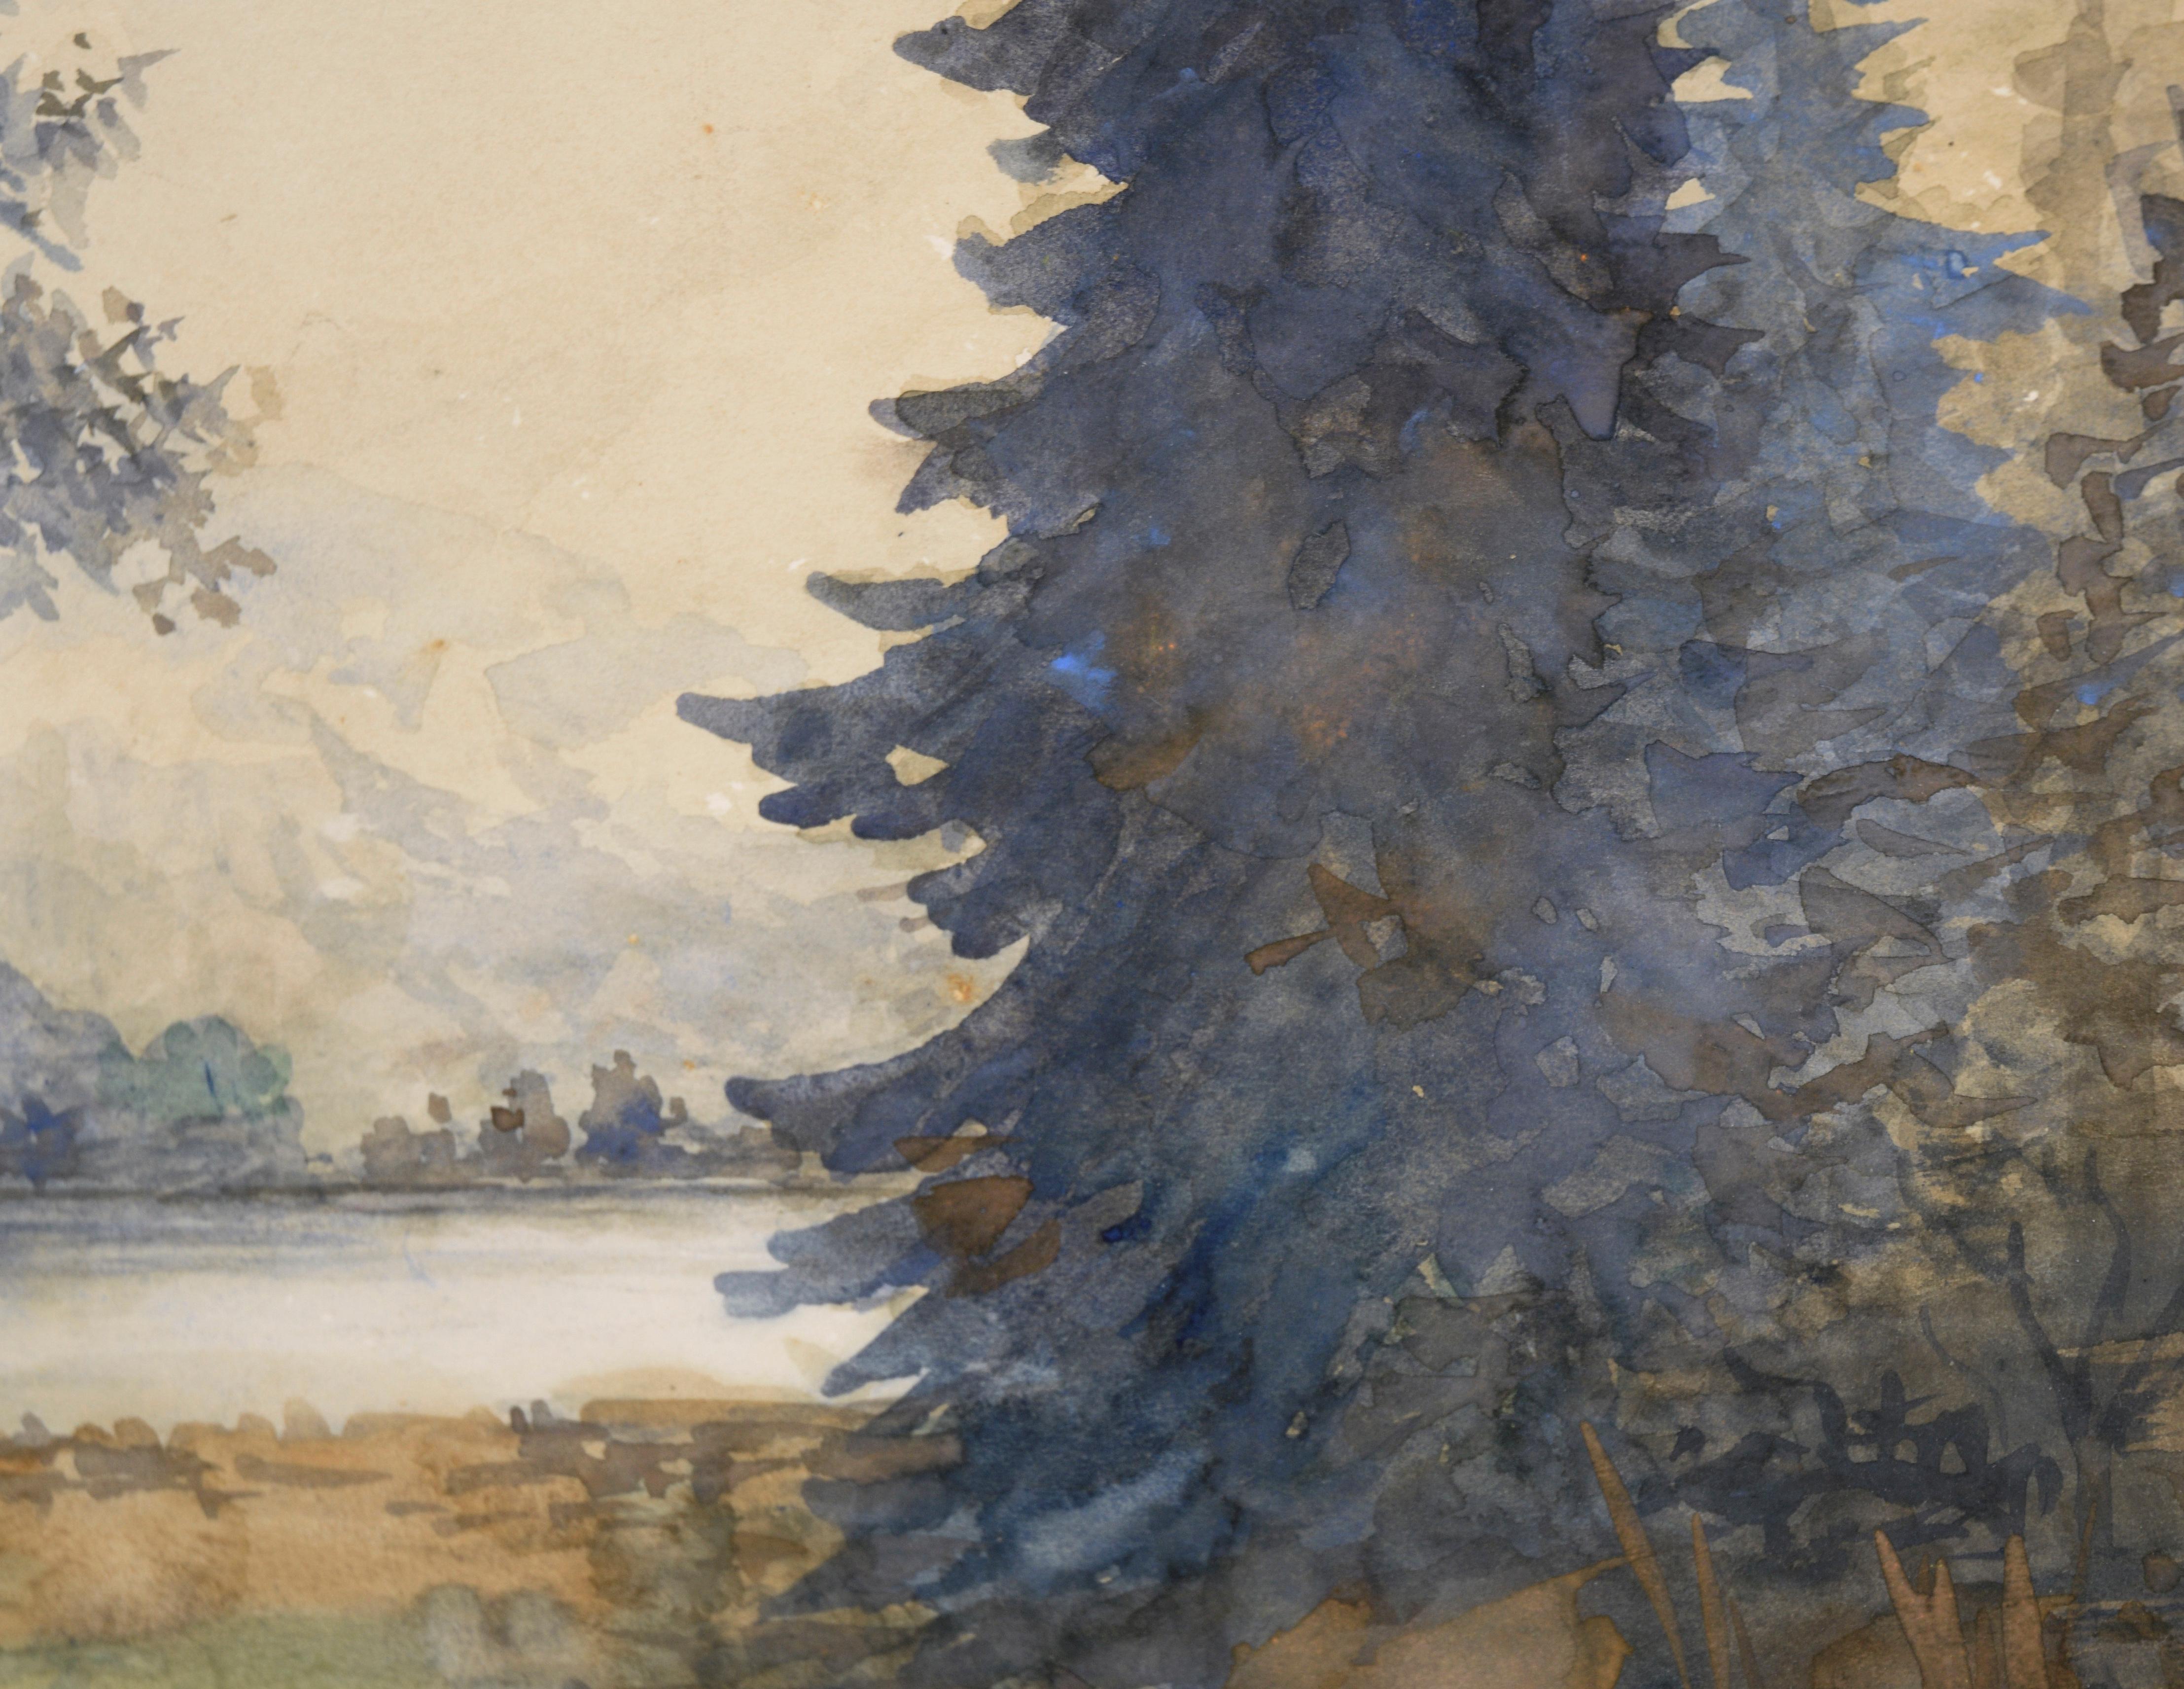 Bold landscape by American artist Joseph A. Atchison (1895-1967). Dark blue pine trees frame the scene on either side, with a lake in the center. Beyond the lake, a group of mountains rise from the horizon to mingle with the cloudy sky.

Signed in